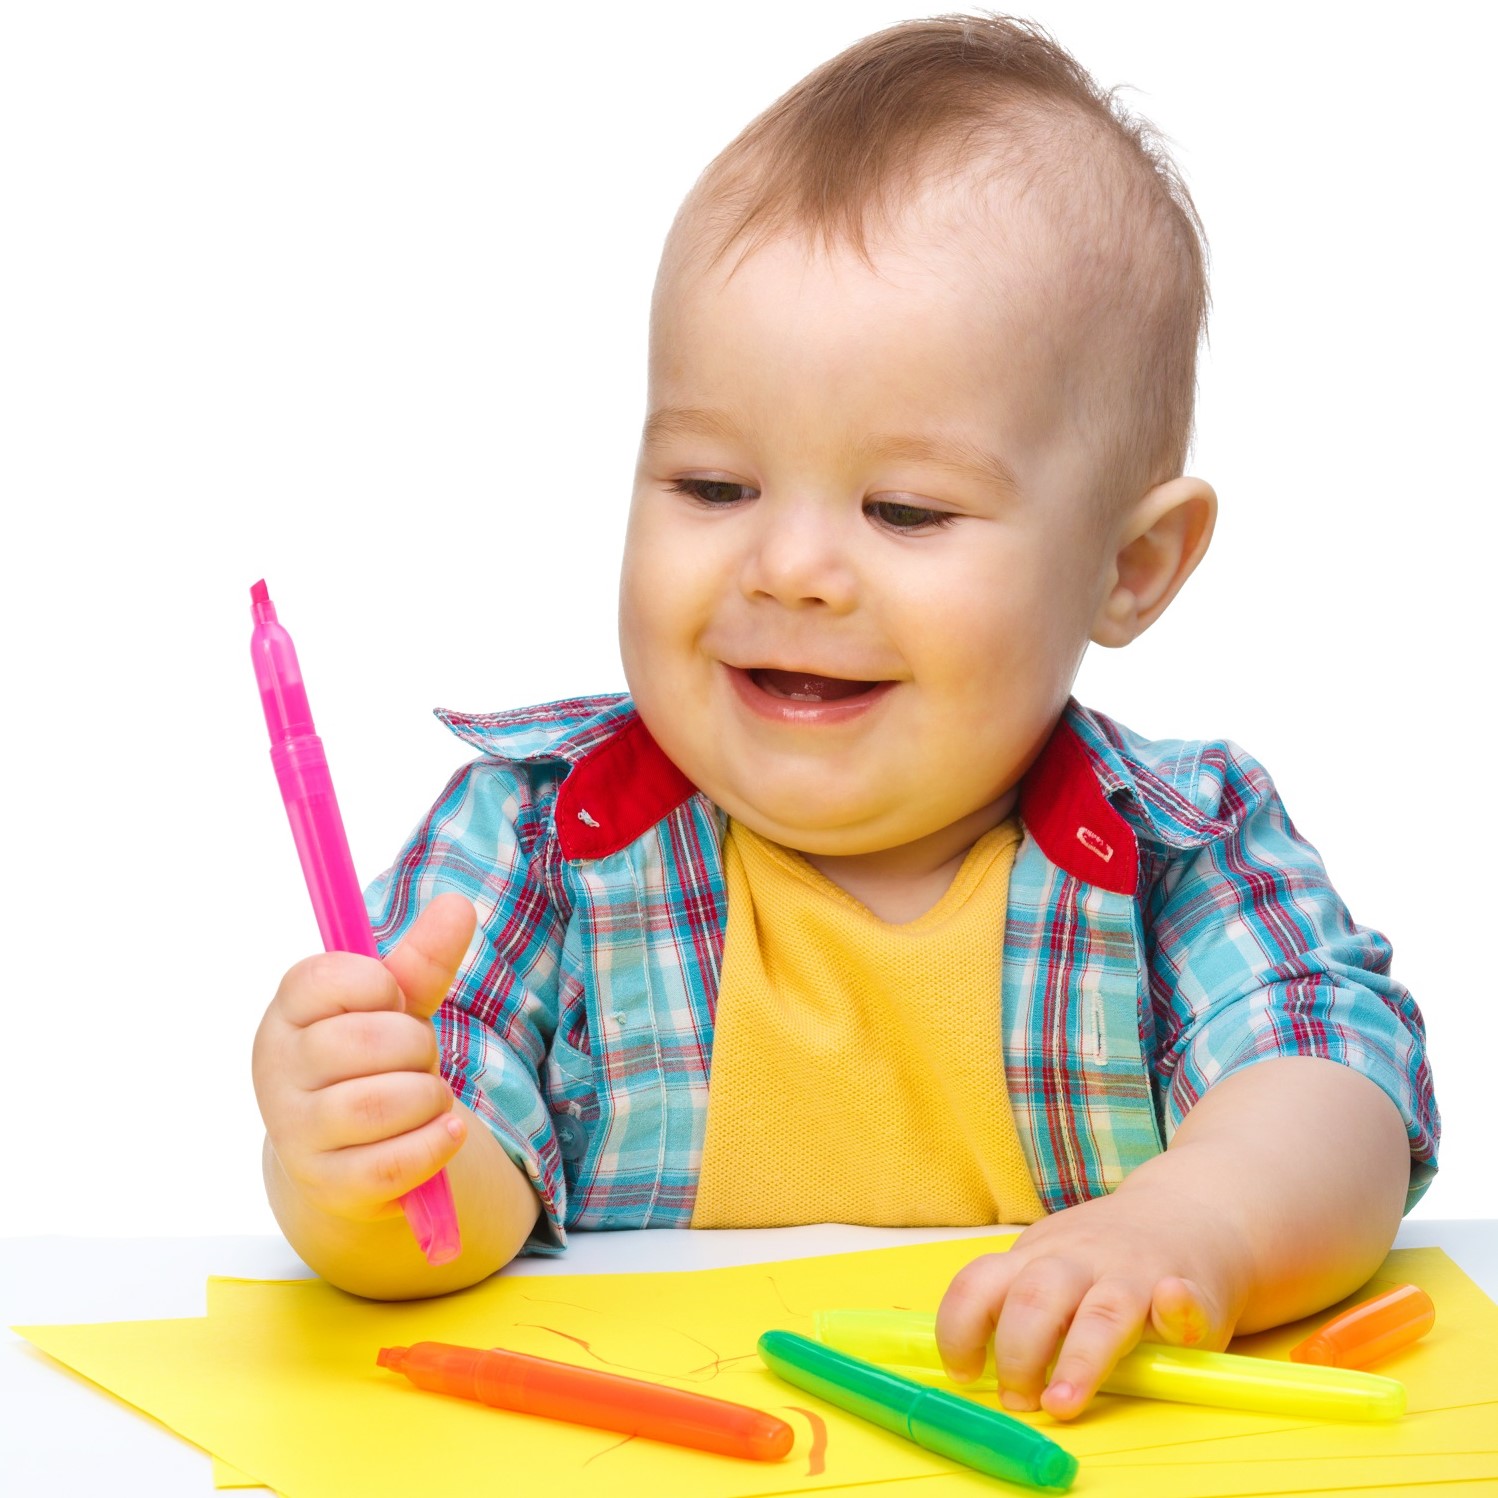 Young boy colouring with crayons